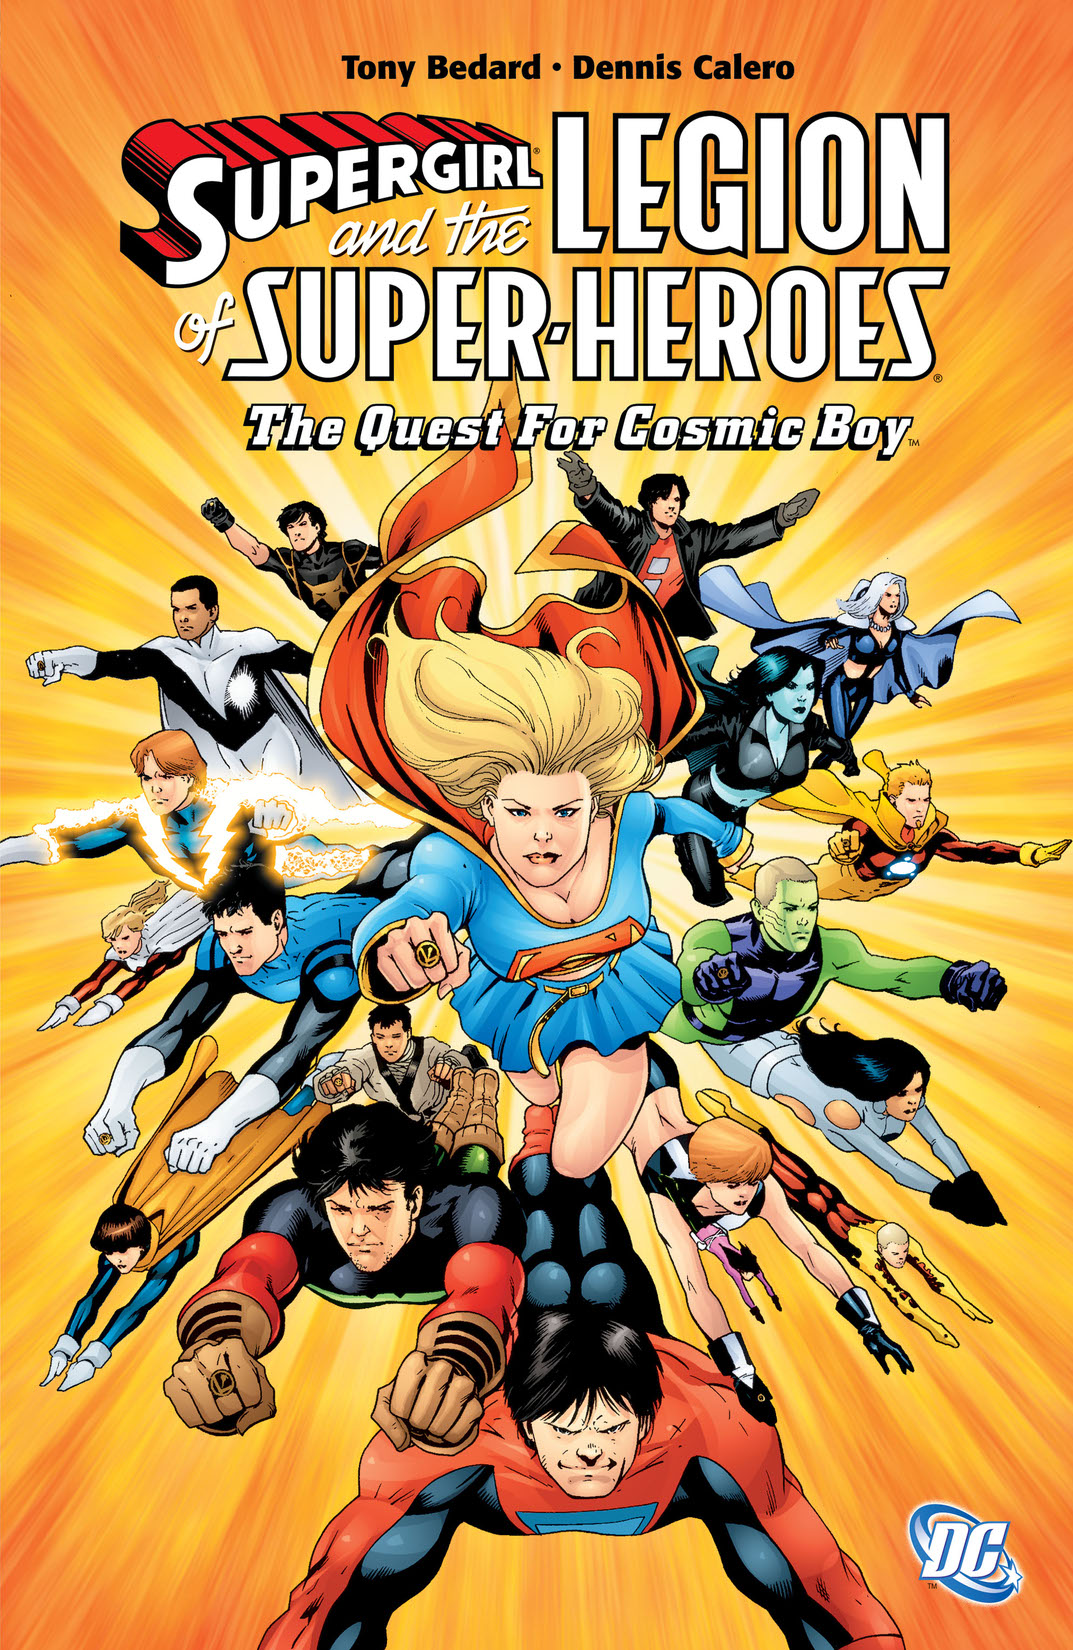 Supergirl & the Legion of Super Heroes: The Quest for Cosmic Boy preview images